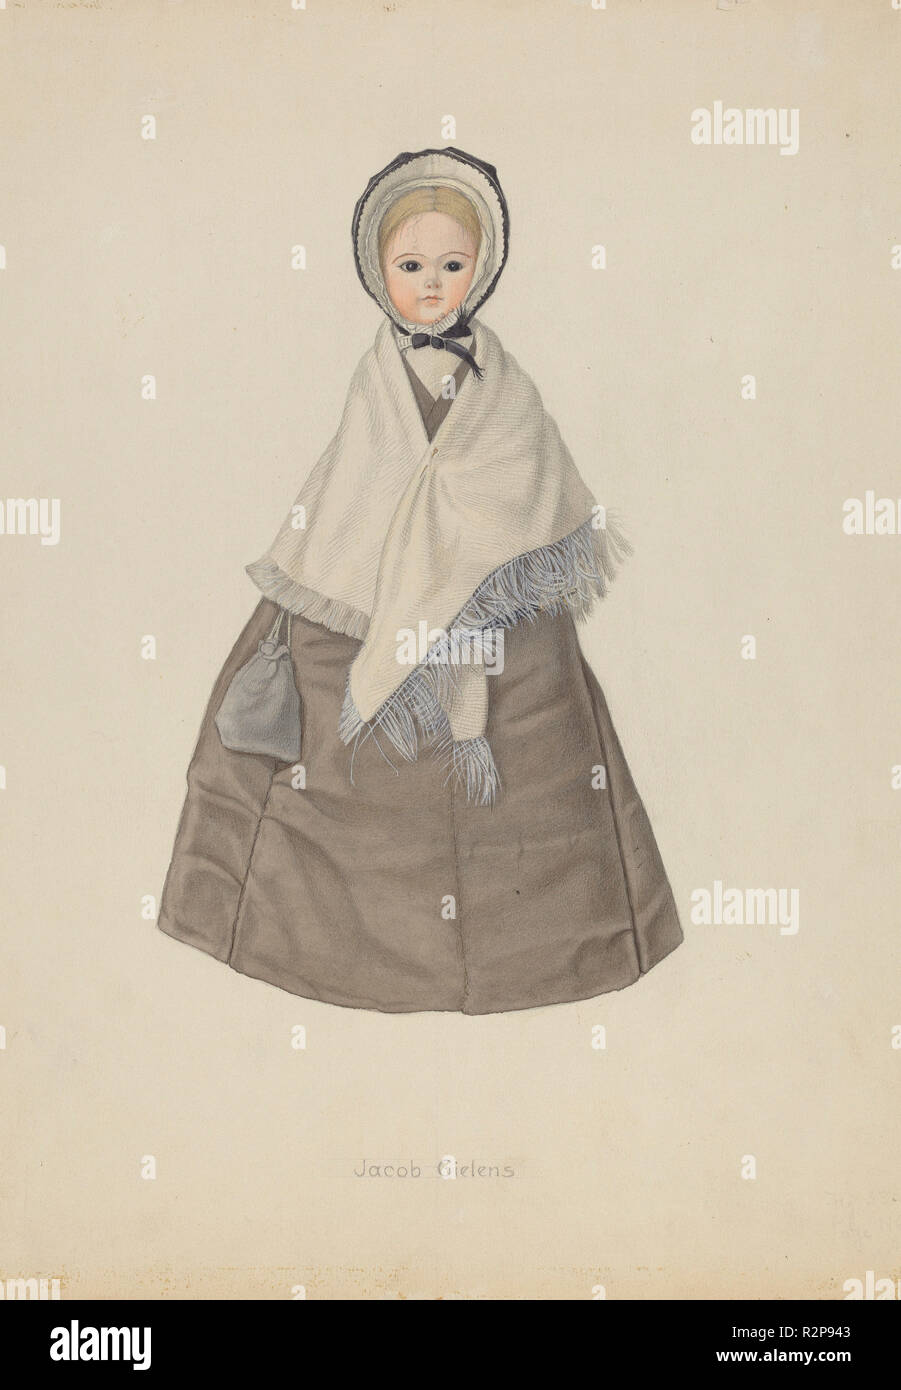 Quaker Doll. Dated: 1935/1942. Dimensions: overall: 35.4 x 24.5 cm (13 15/16 x 9 5/8 in.)  Original IAD Object: 9' high. Medium: watercolor, graphite, and gouache on paperboard. Museum: National Gallery of Art, Washington DC. Author: Jacob Gielens. Stock Photo